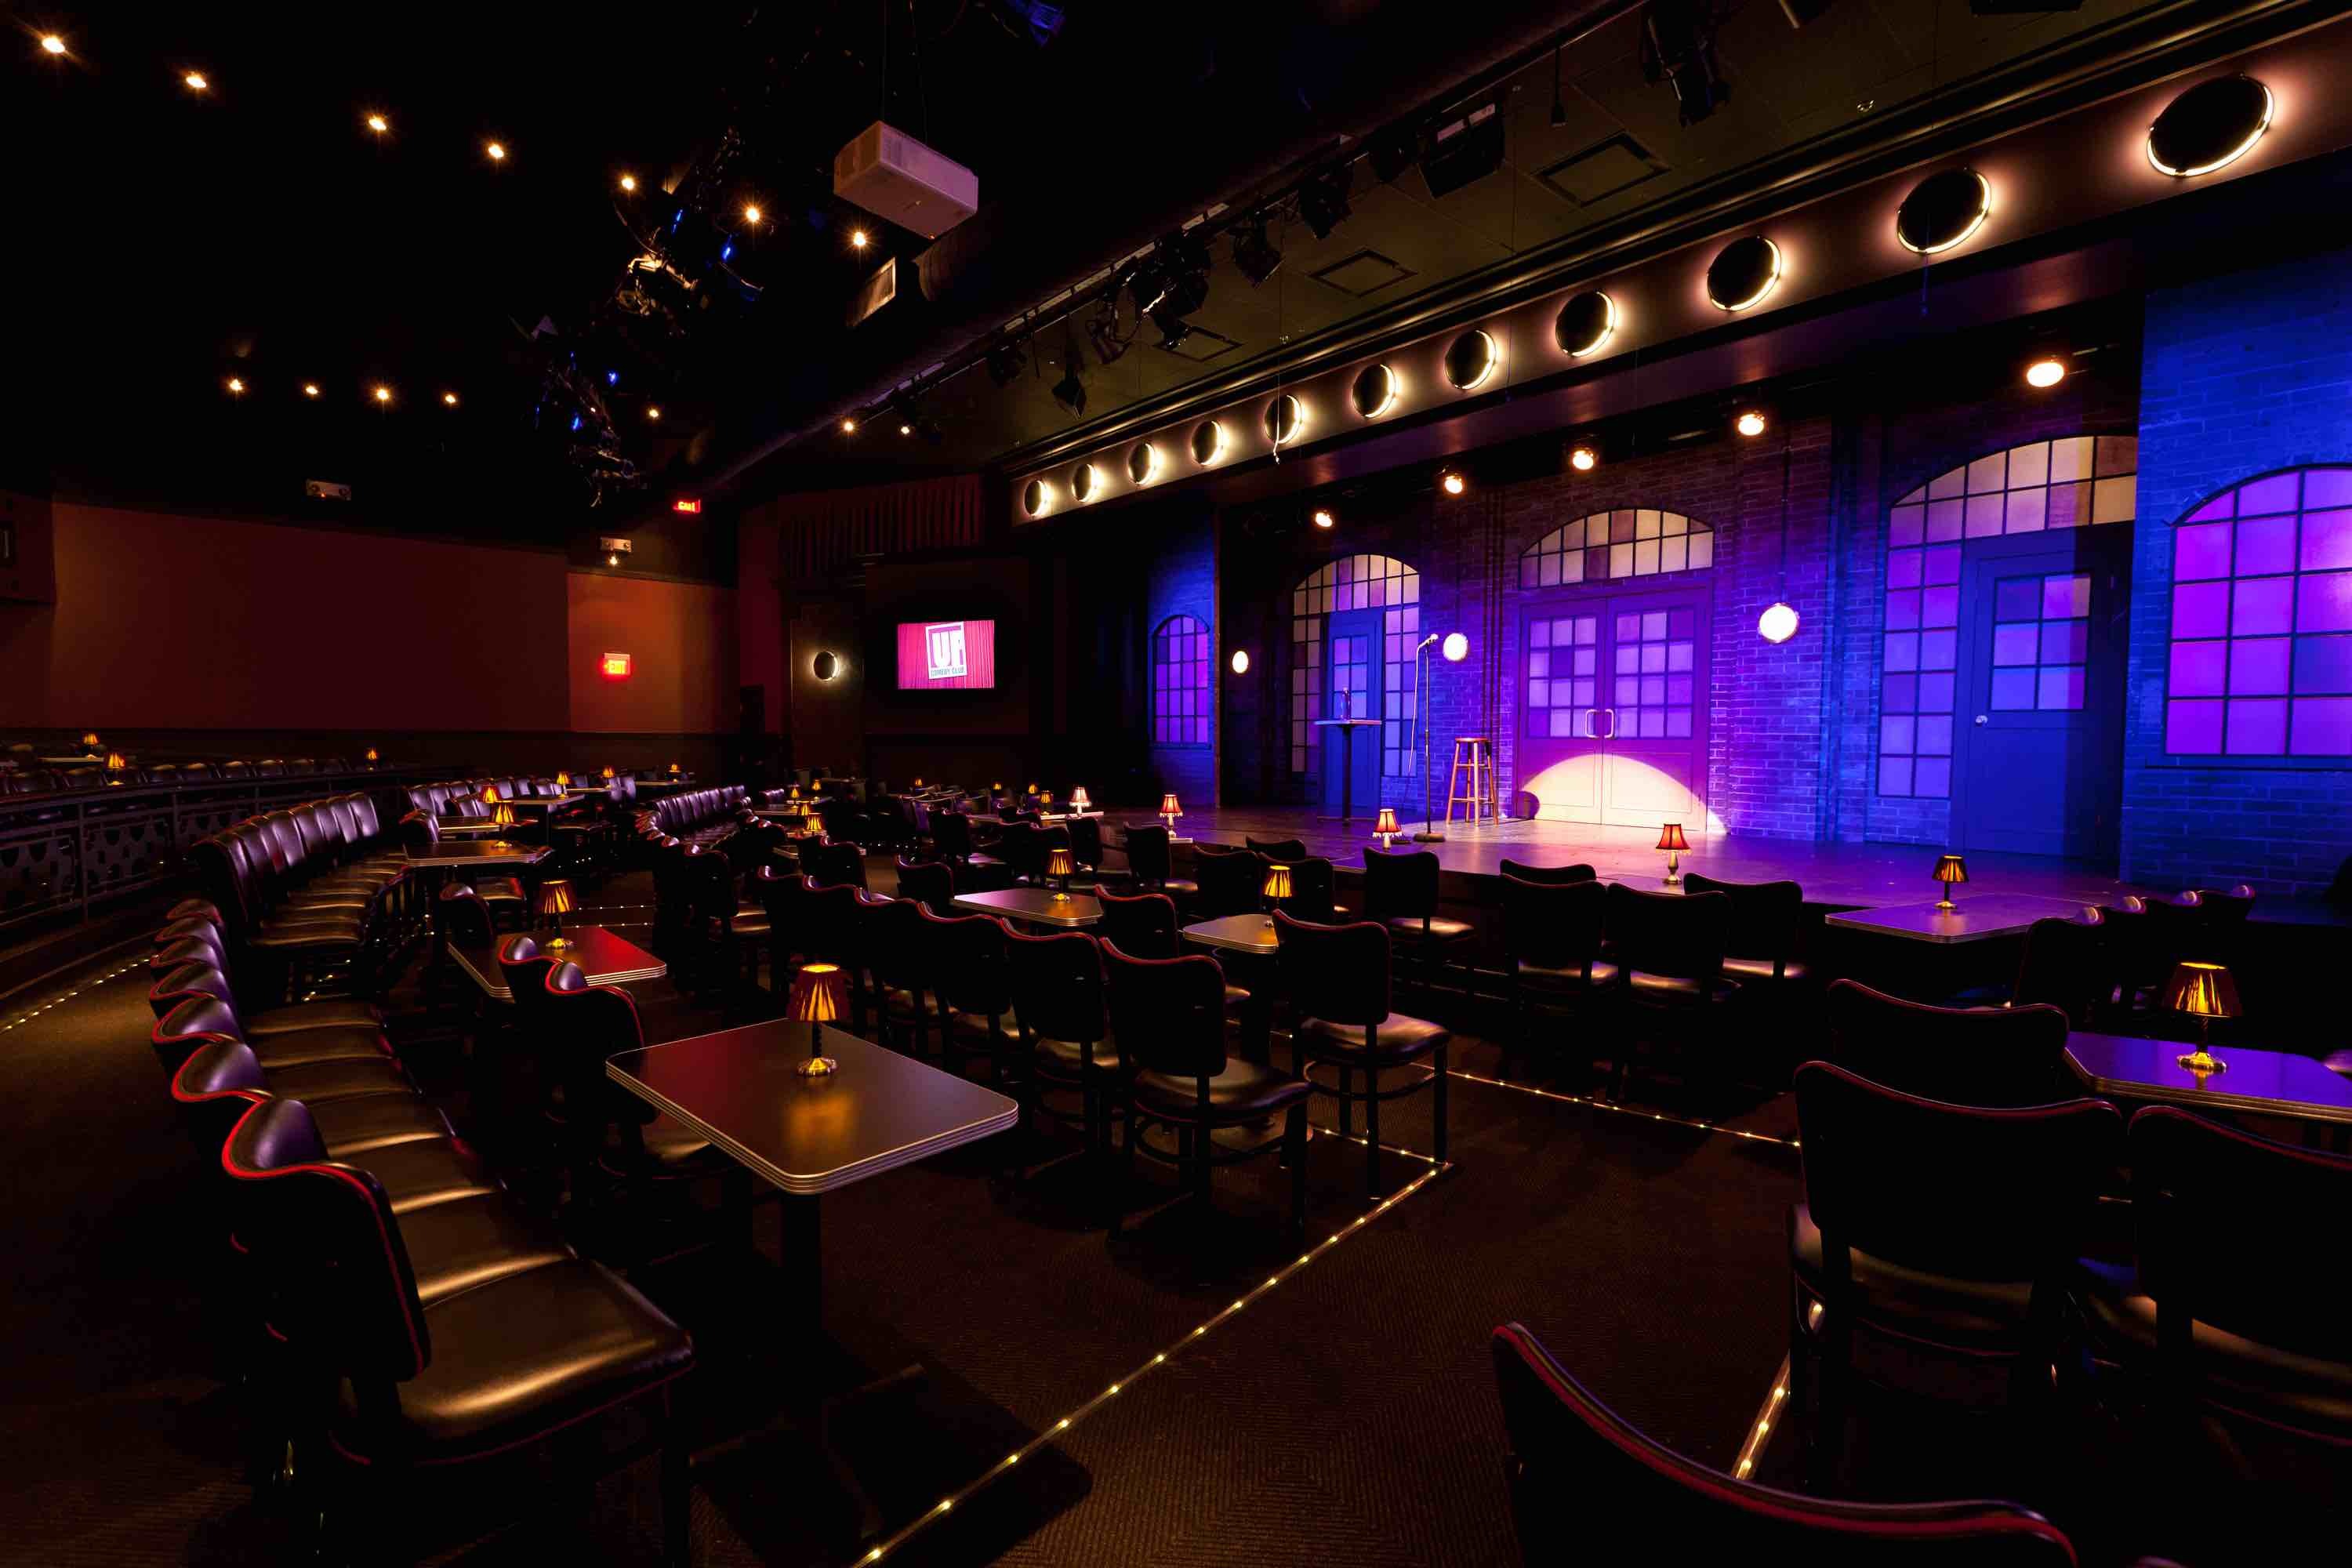 Boston Comedy Club - Stand-Up Comedy in an Underground Cocktail